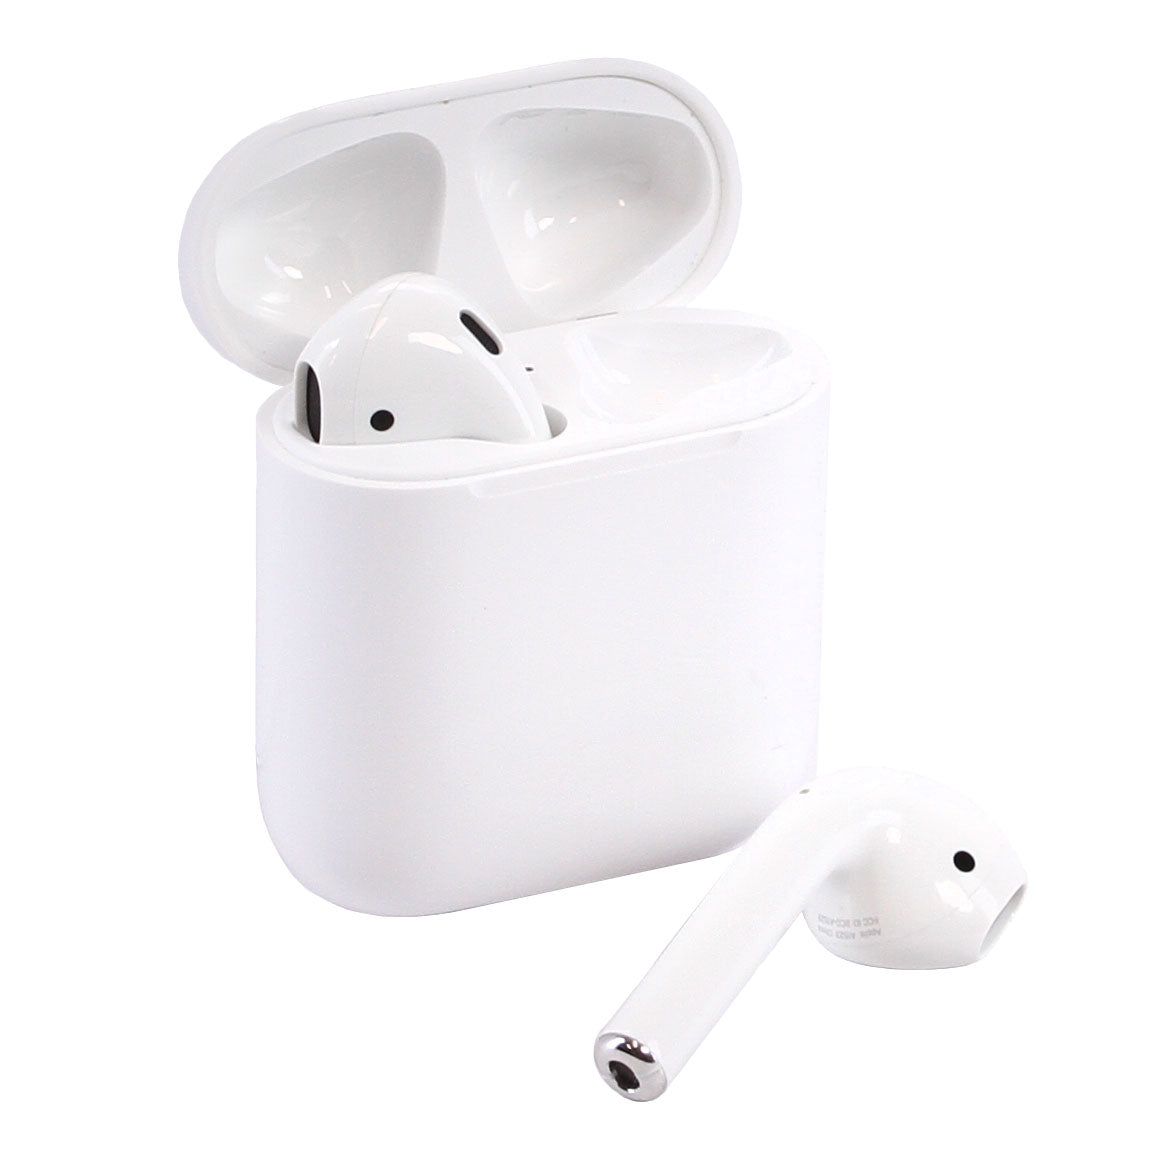 Apple AirPods 2 with Wireless Charging Case (Latest Model) - White (Refurbished)